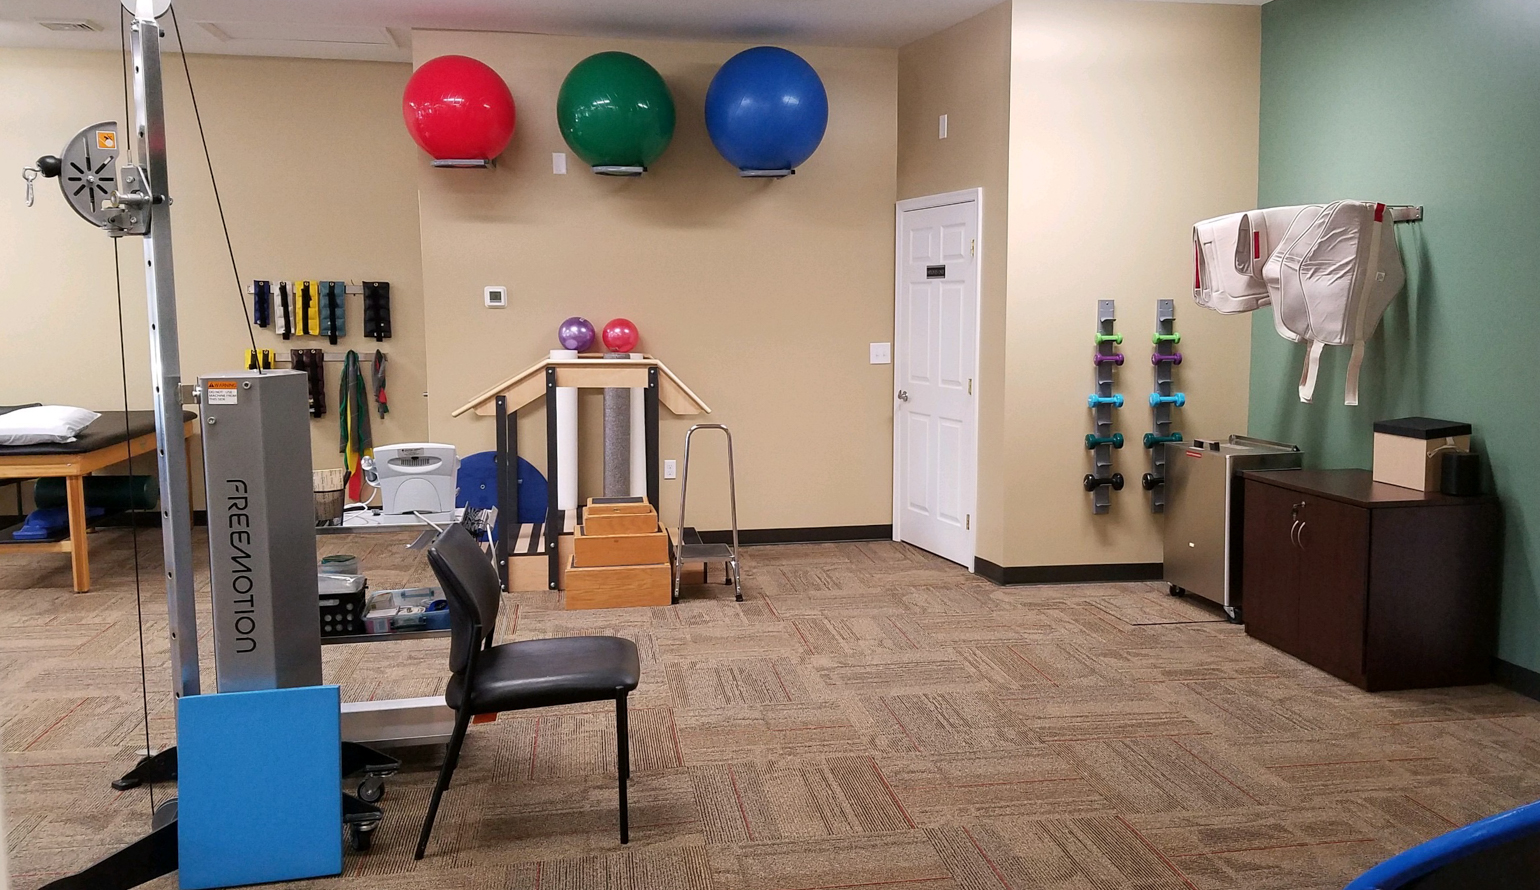 Drayer Physical Therapy Institute 223 E Main St Ste E, Rising Sun Maryland 21911